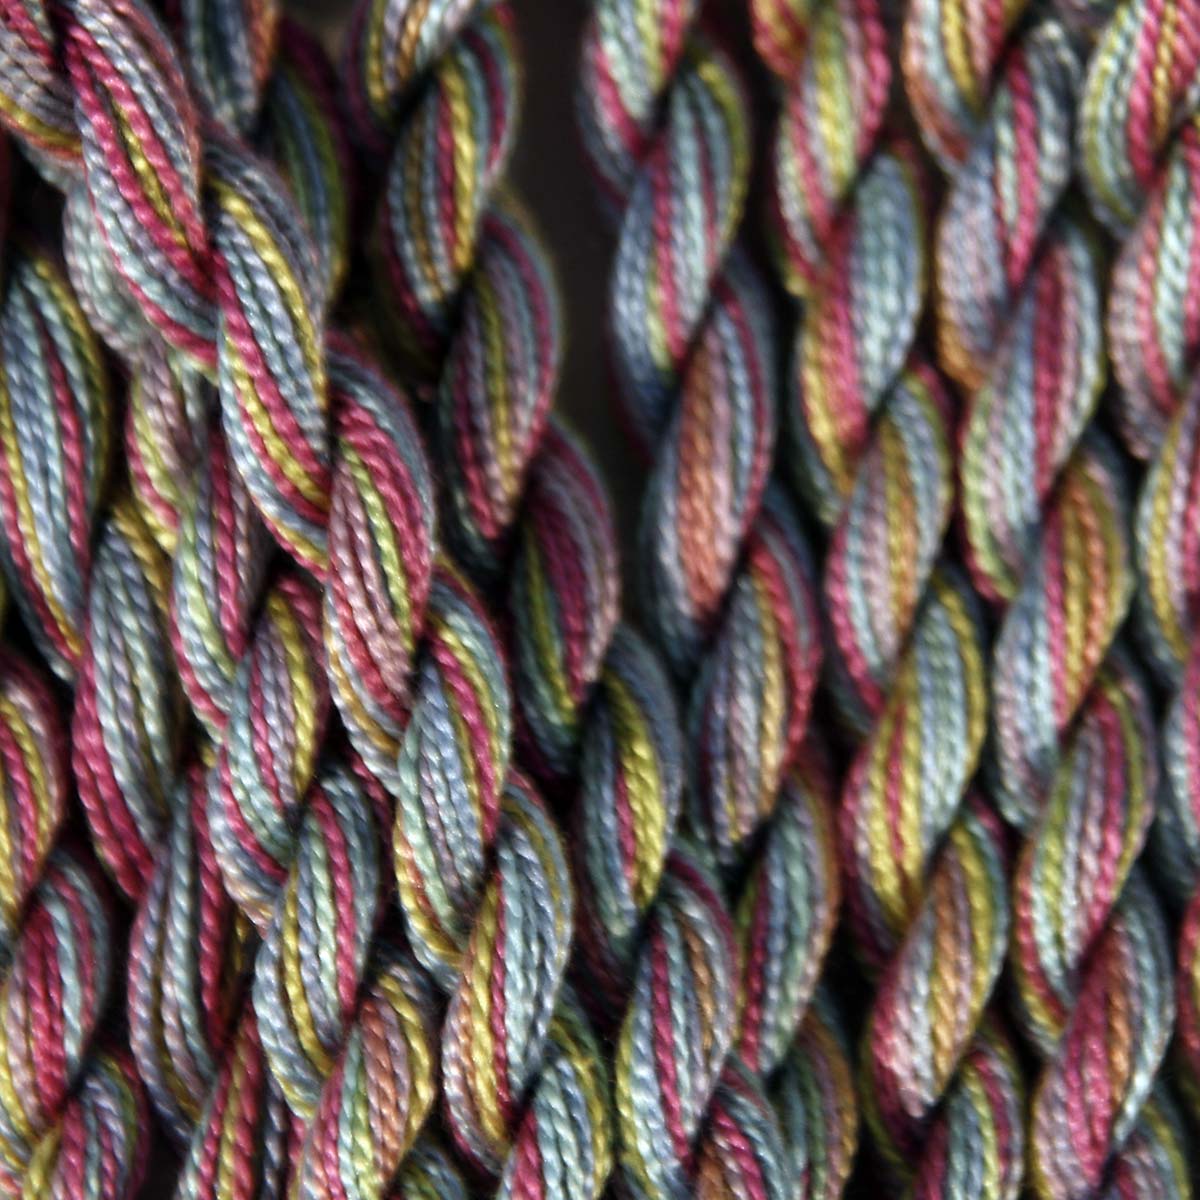 Colour Streams www.colourstreams.com.au Hand Dyed Cotton Threads Cotto Strands Slow Stitch Embroidery Textile Arts Fibre DL 34 Arabian Nights Purples Greens Blues Pinks Golds